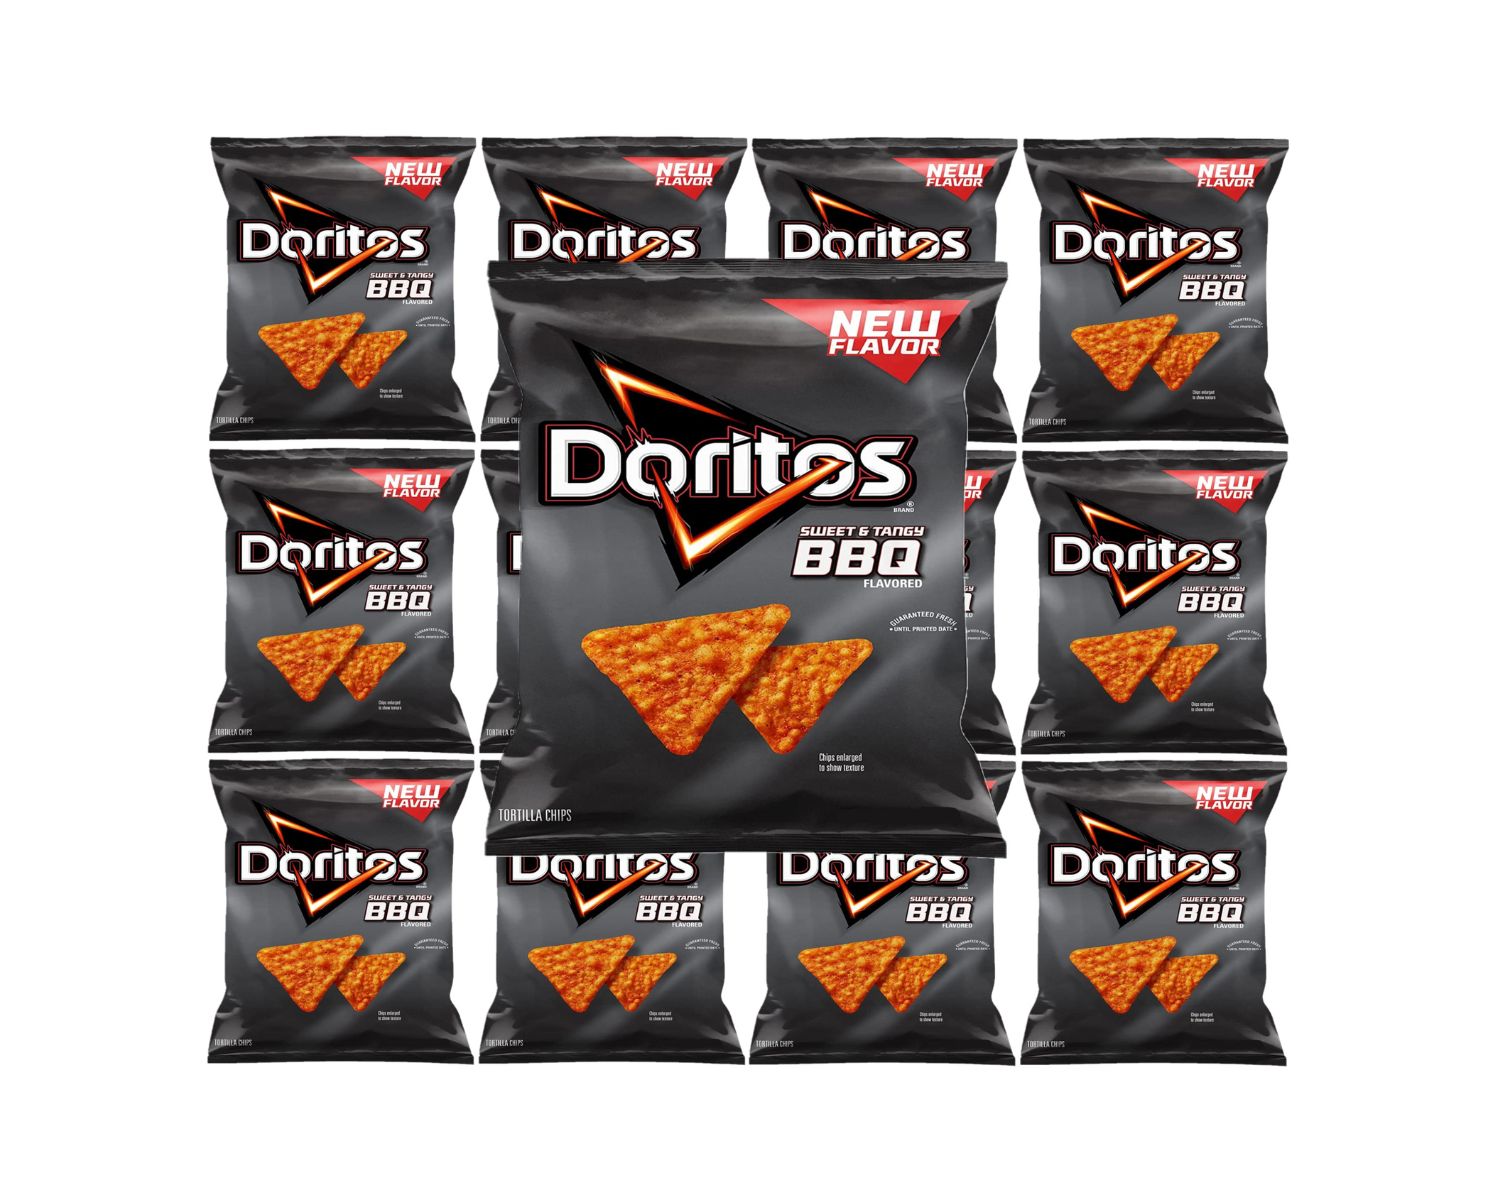 17-mind-blowing-facts-about-bbq-doritos